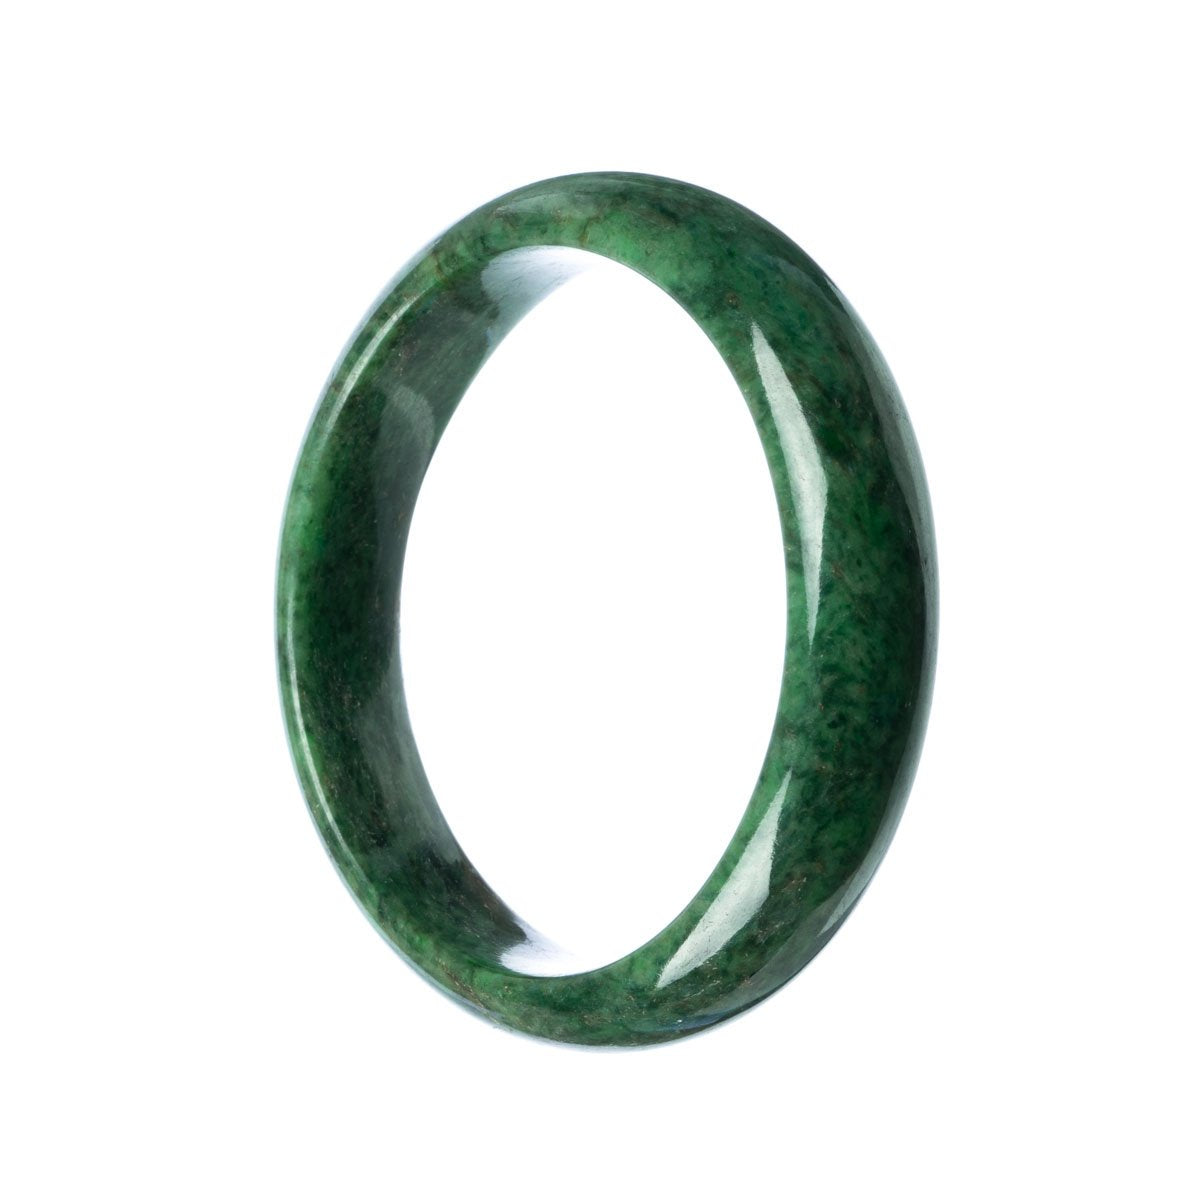 A close-up image of a beautiful green jade bangle bracelet with a half-moon shape. The bracelet is made of certified Grade A green jadeite jade and measures 63mm in diameter. It is a high-quality piece of jewelry from the MAYS™ brand.